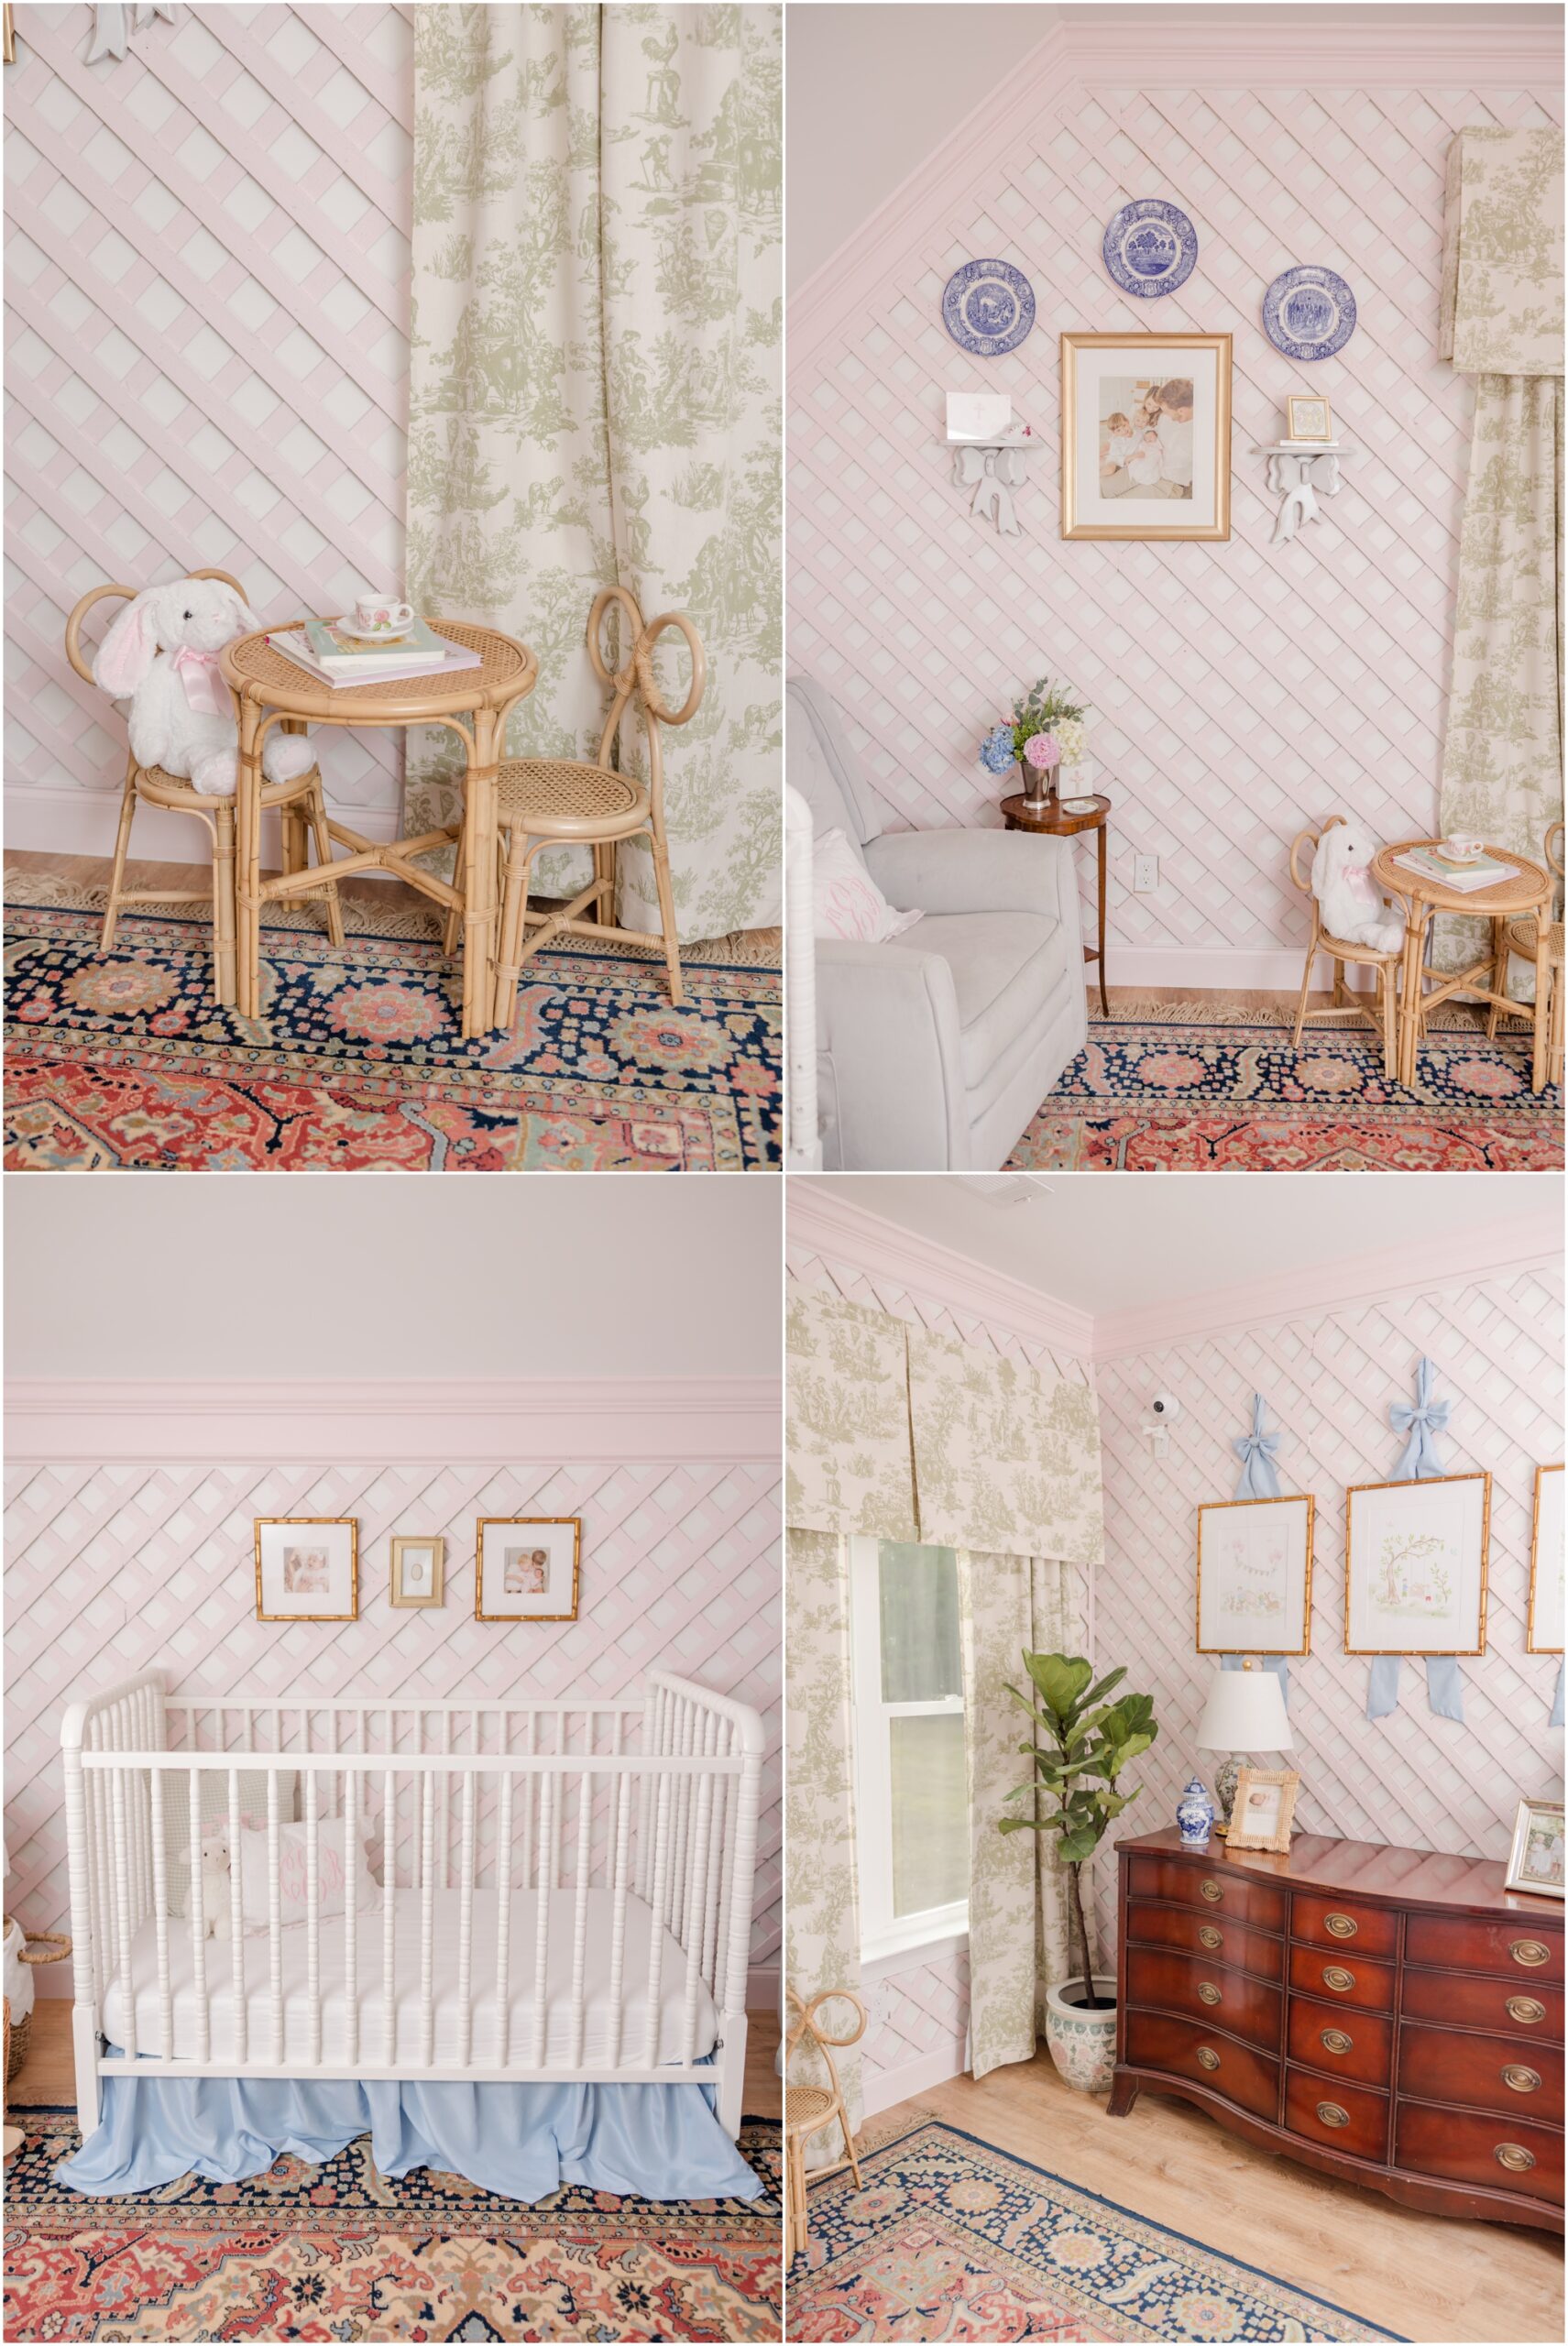 Grandmillenial nursery inspiration including a wicker childs table, white cribe, pink latice on the walls, blue plates on the wall, and an antique dresser.